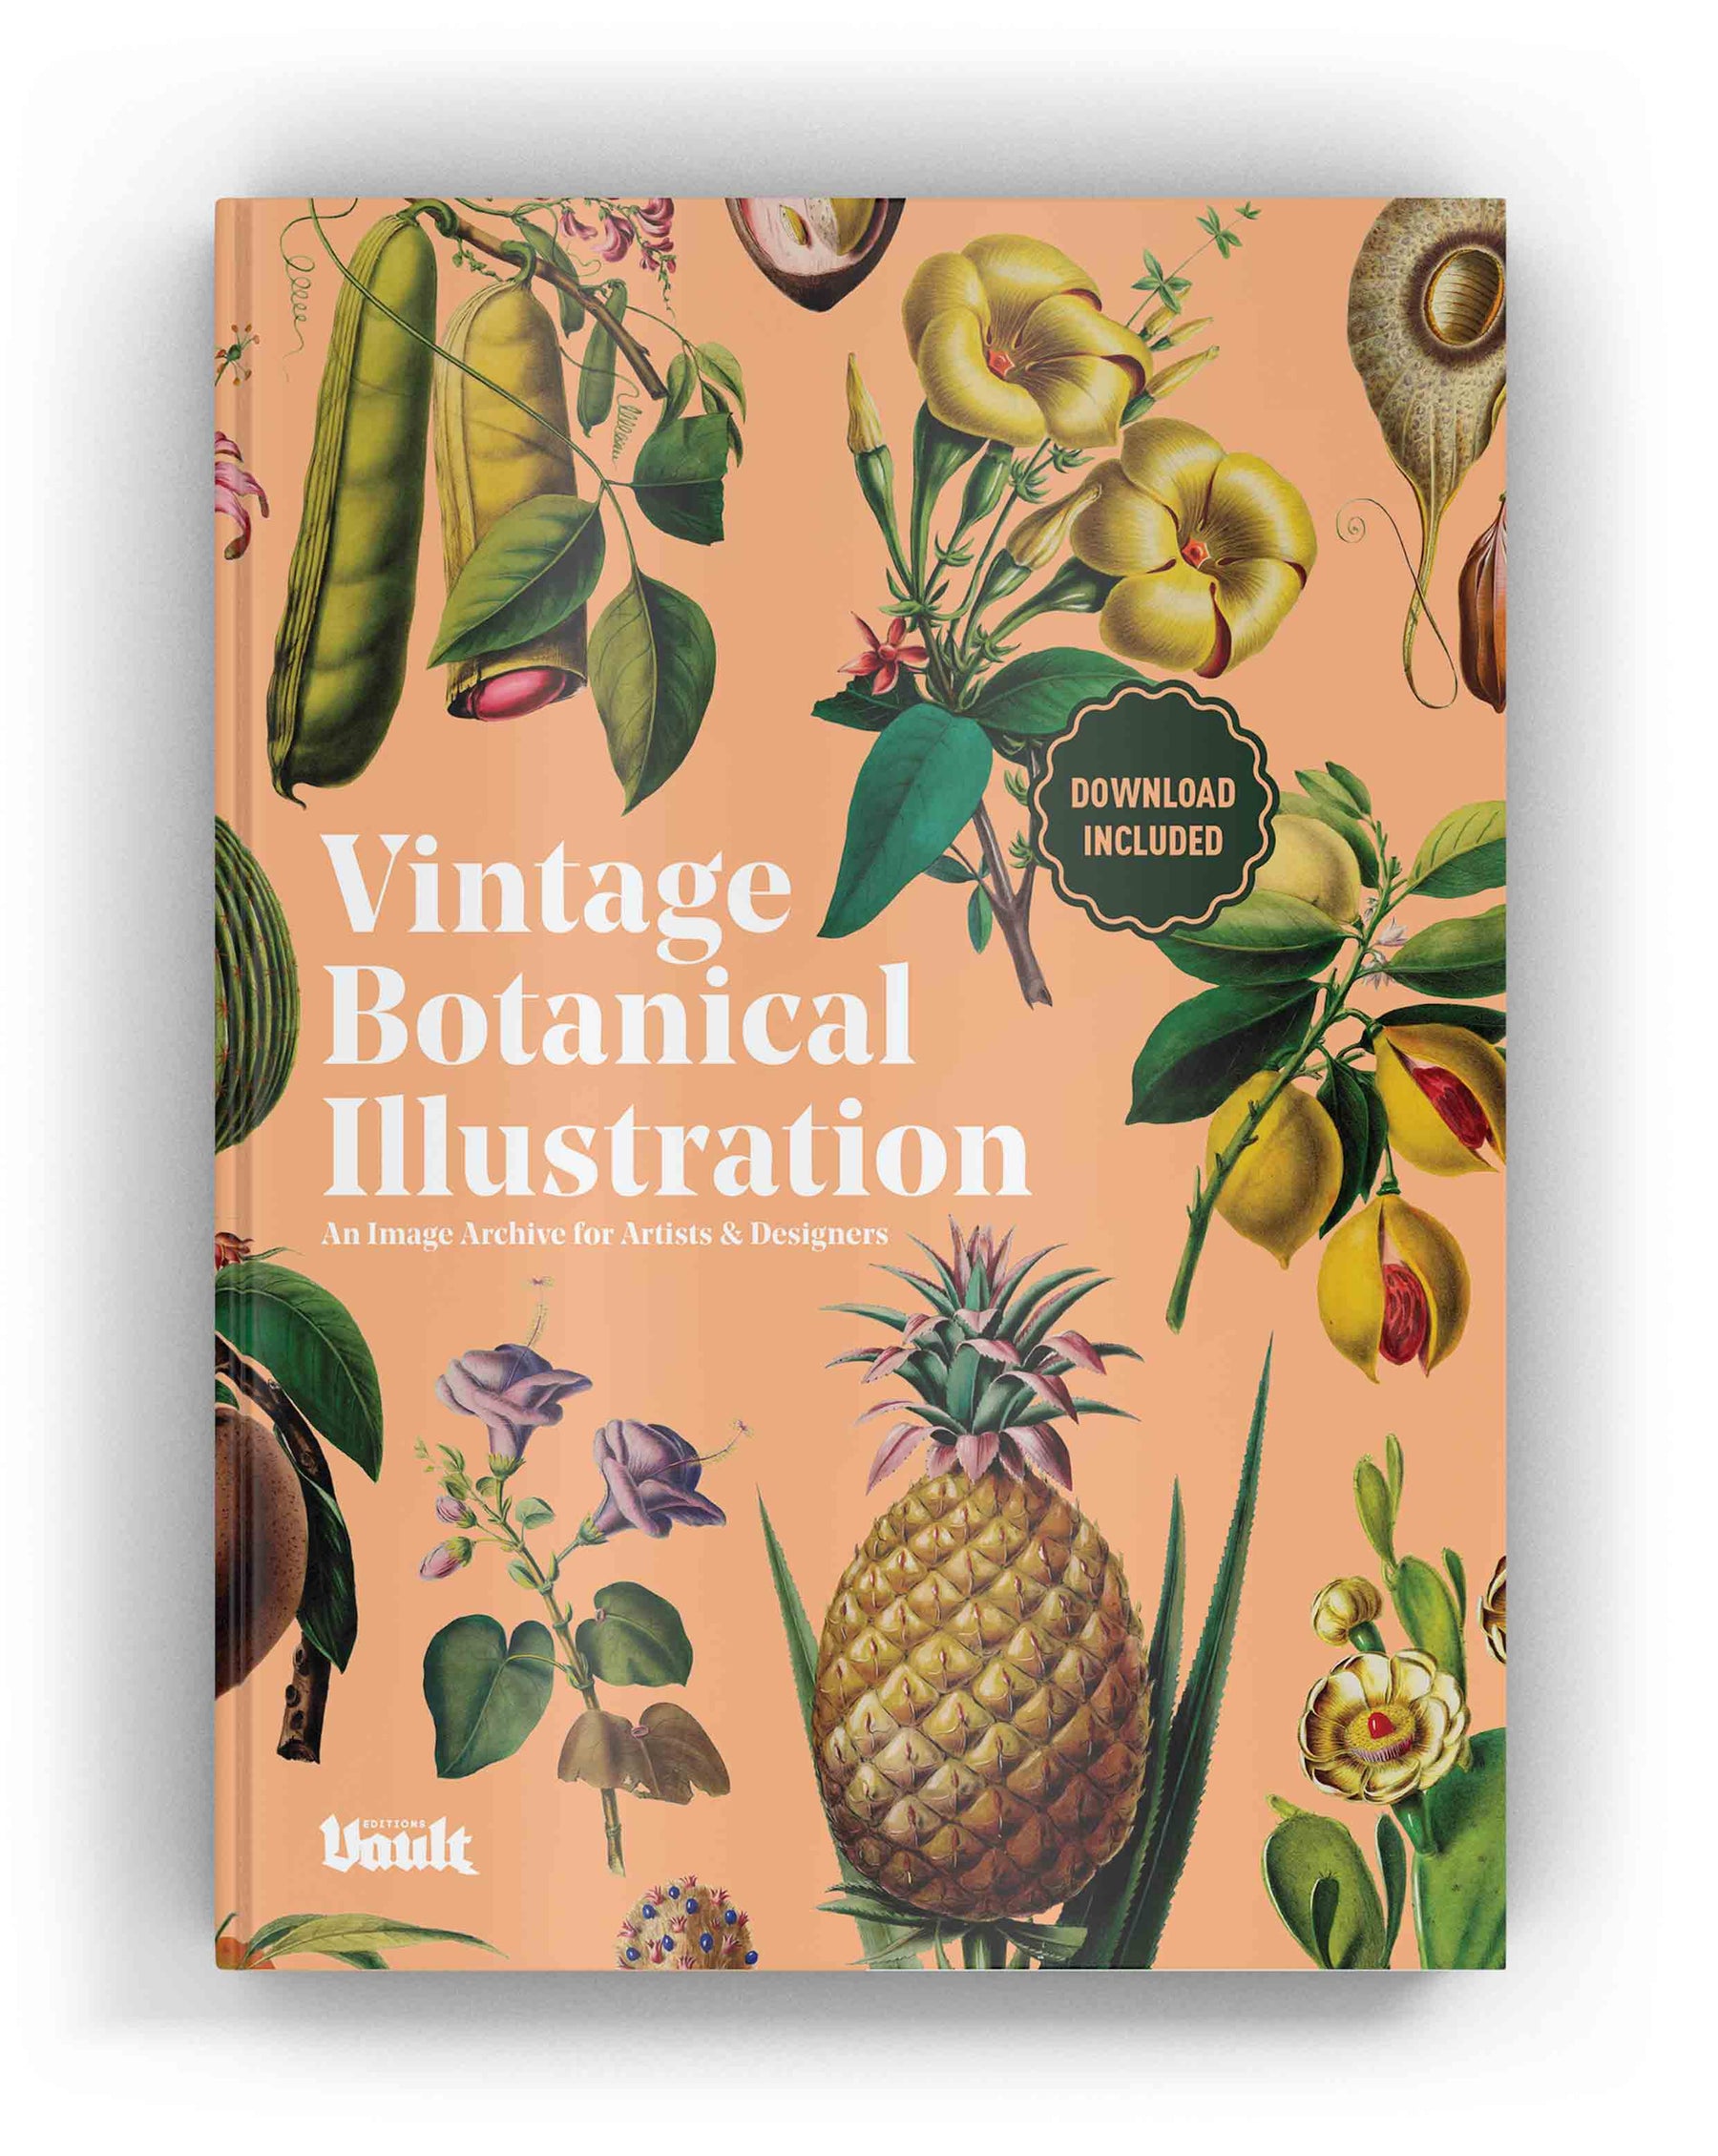 Create Your Own Pressed Botanical Specimen – The Academy of